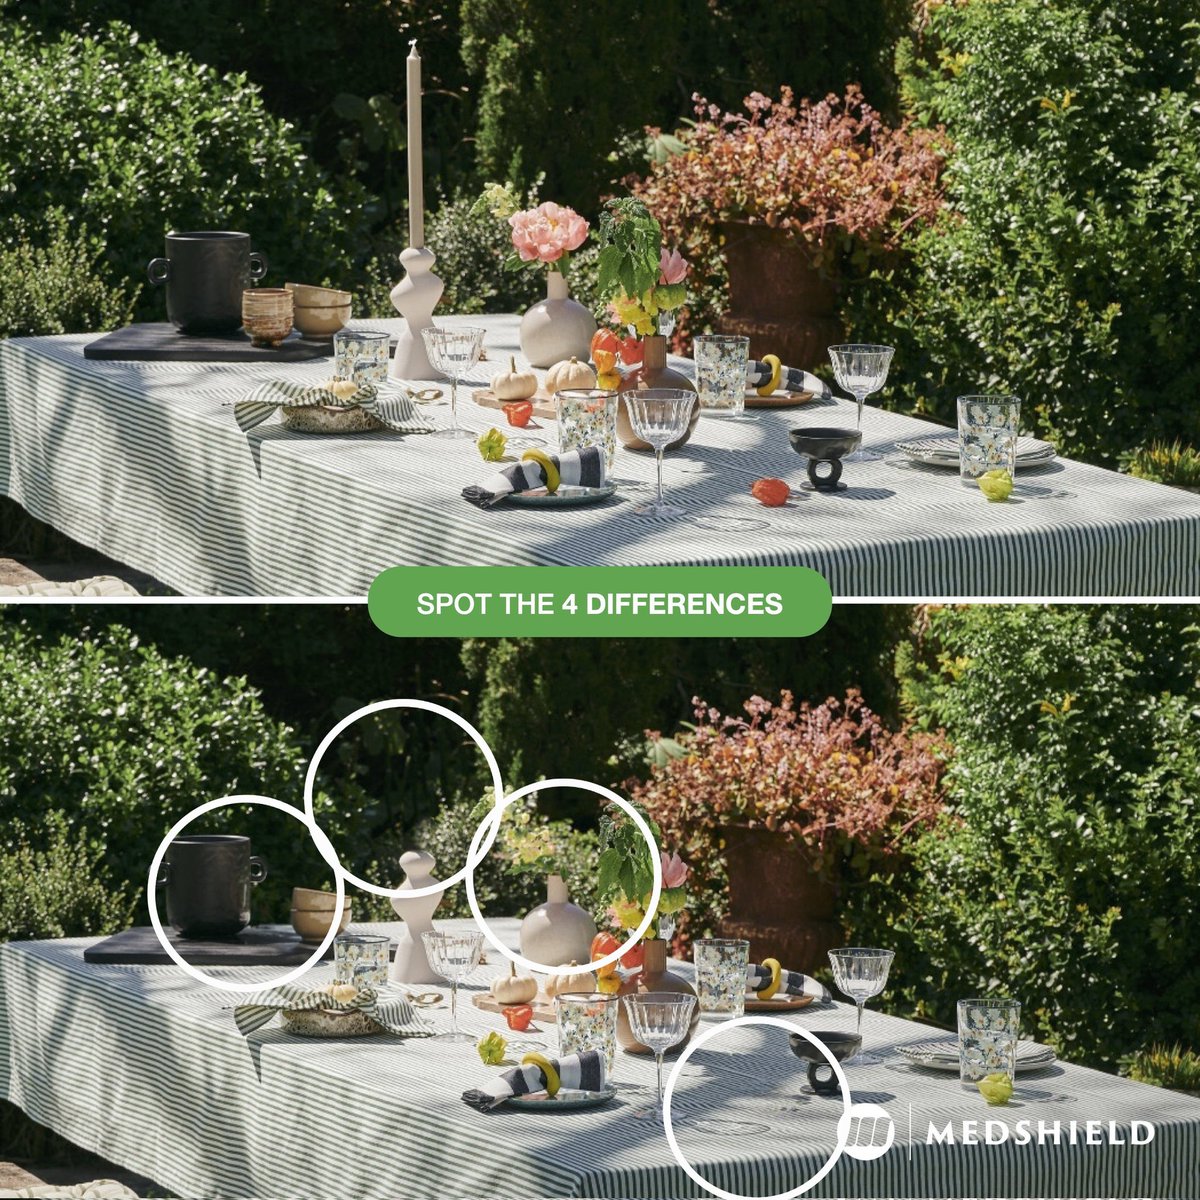 #MedshieldSA #win #EnterToWin
Spotted 4 differences
1.Missing Candle
2.Clay cup missing 
3. Pink flower missing from white vase
4. Habenero chilli missing